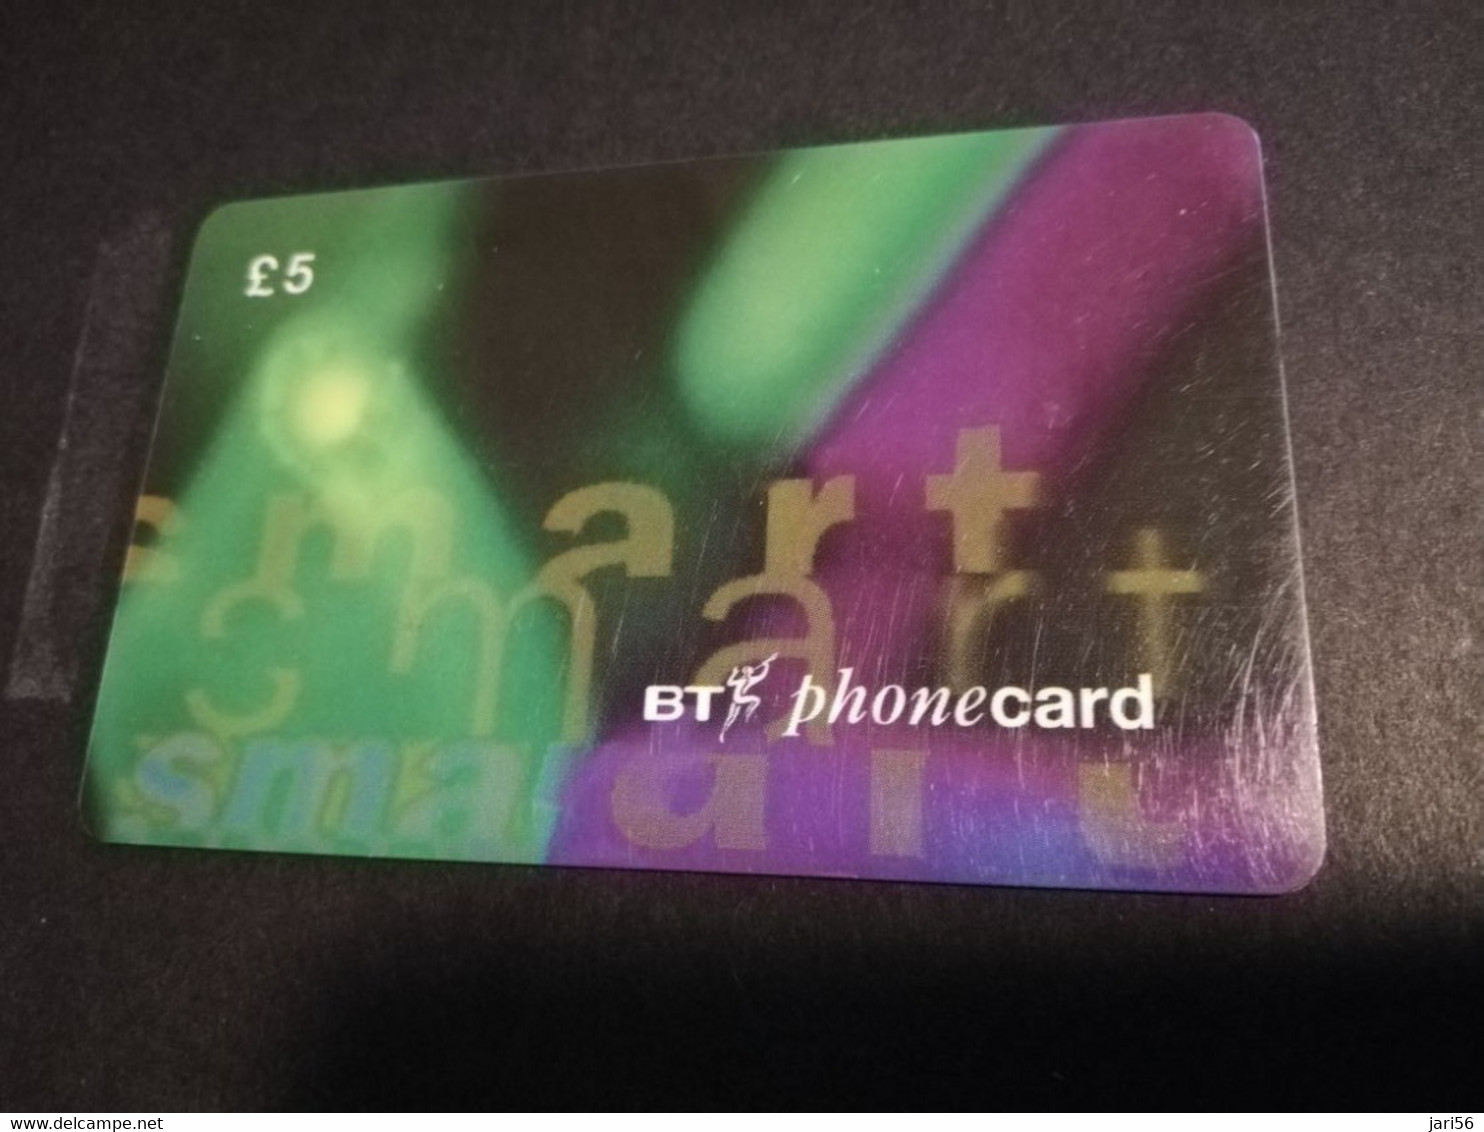 GREAT BRETAGNE  CHIPCARDS / TEST CARD 5 POUND    EXPIRY DATE 09/97   PERFECT  CONDITION     **4596** - BT General